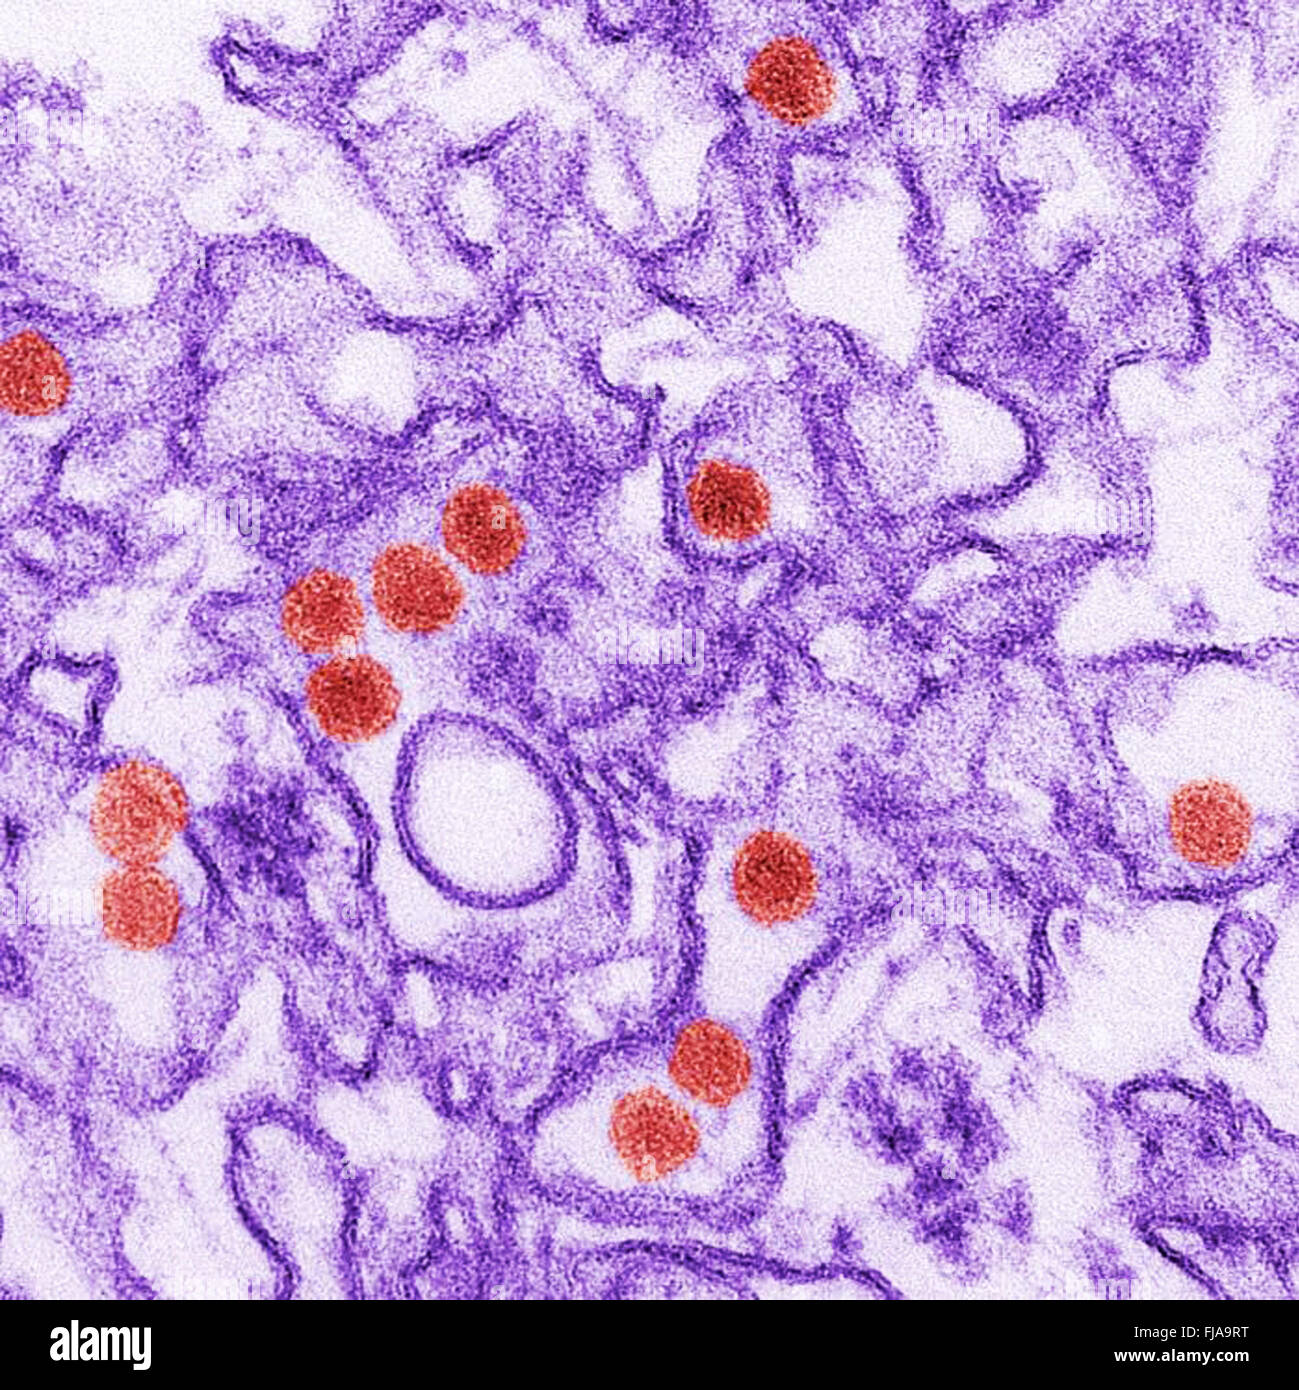 This is a digitally-colorized transmission electron micrograph (TEM) of Zika virus, which is a member of the family Flaviviridae. Virus particles, here colored red, are 40 nm in diameter, with an outer envelope, and an inner dense core. The image was created by CDC/ Cynthia Goldsmith Stock Photo